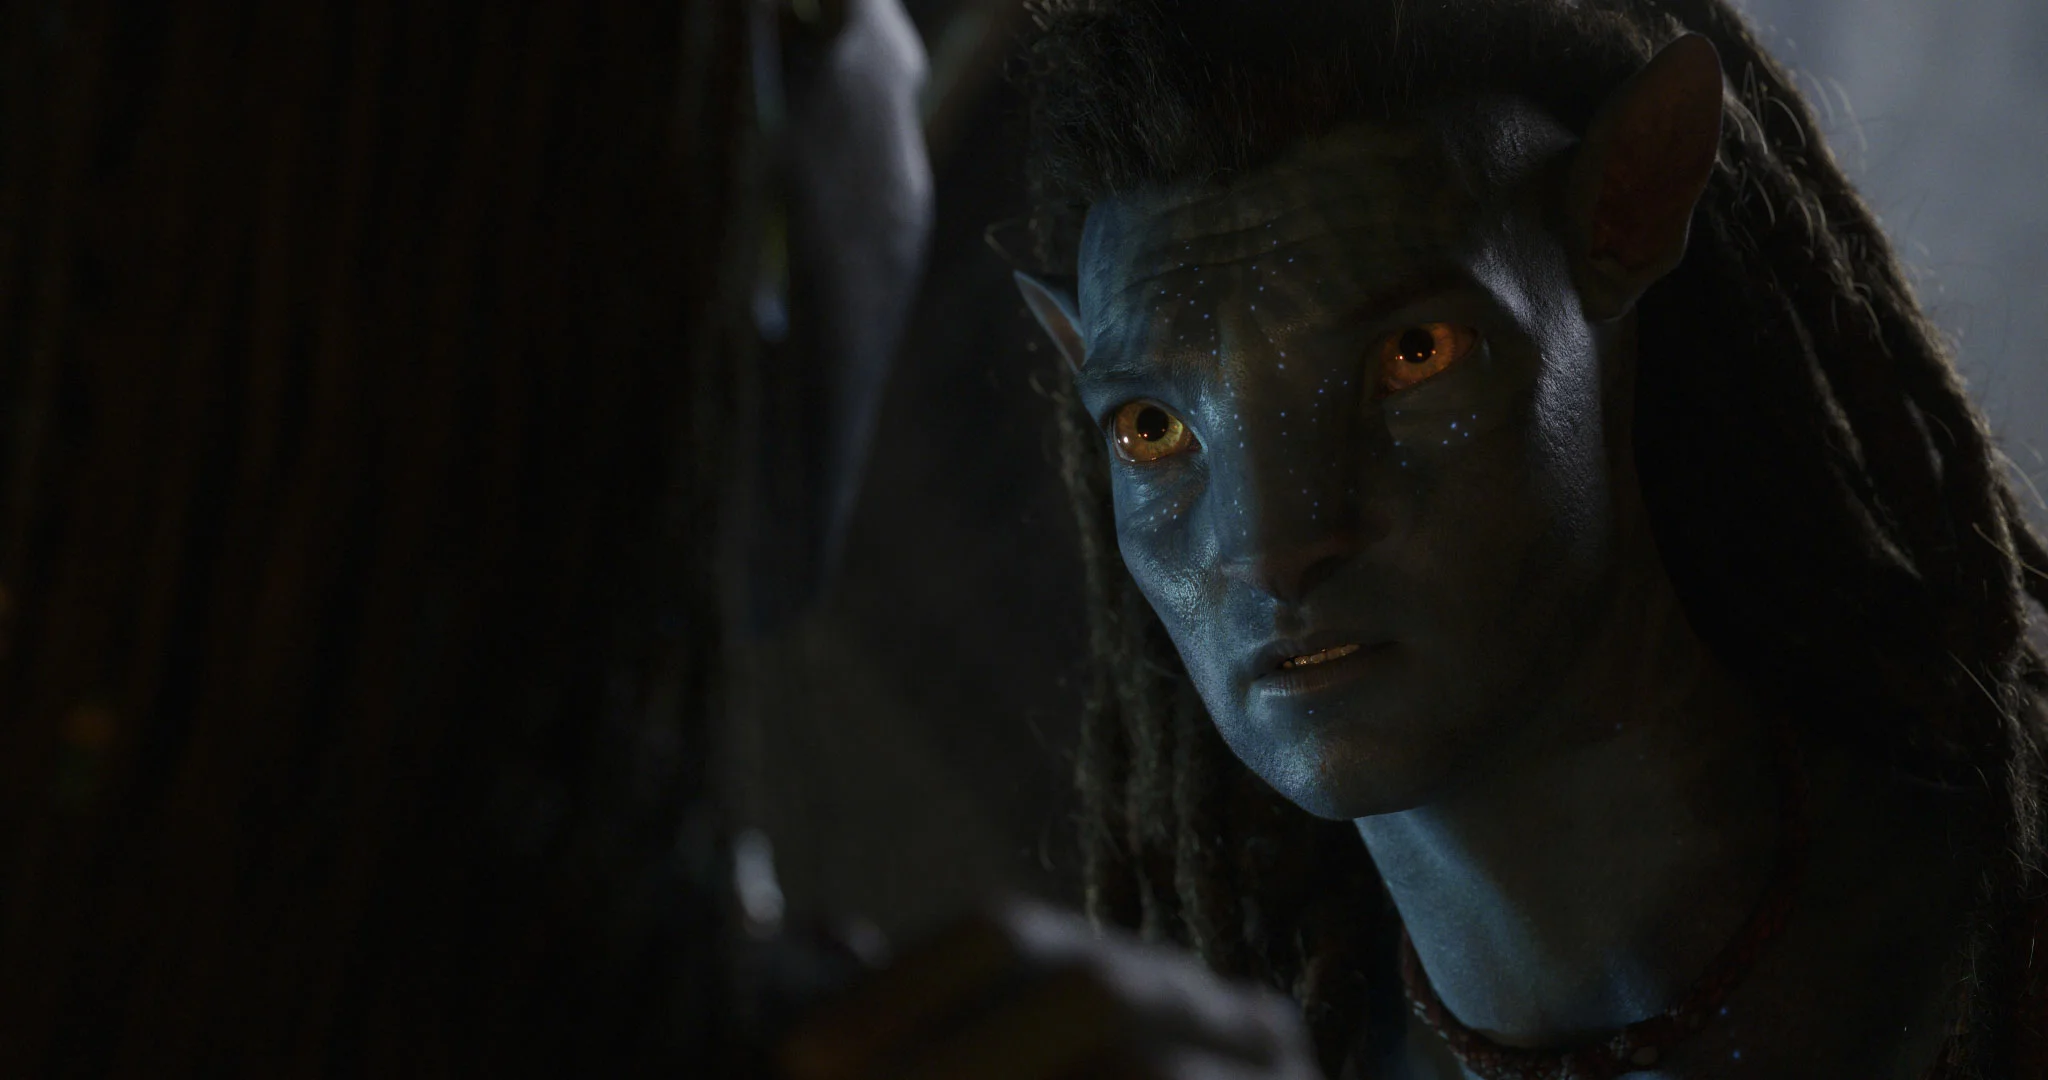 avatar-the-way-of-water-reveals-new-stills-released-at-the-end-of-the-year-1